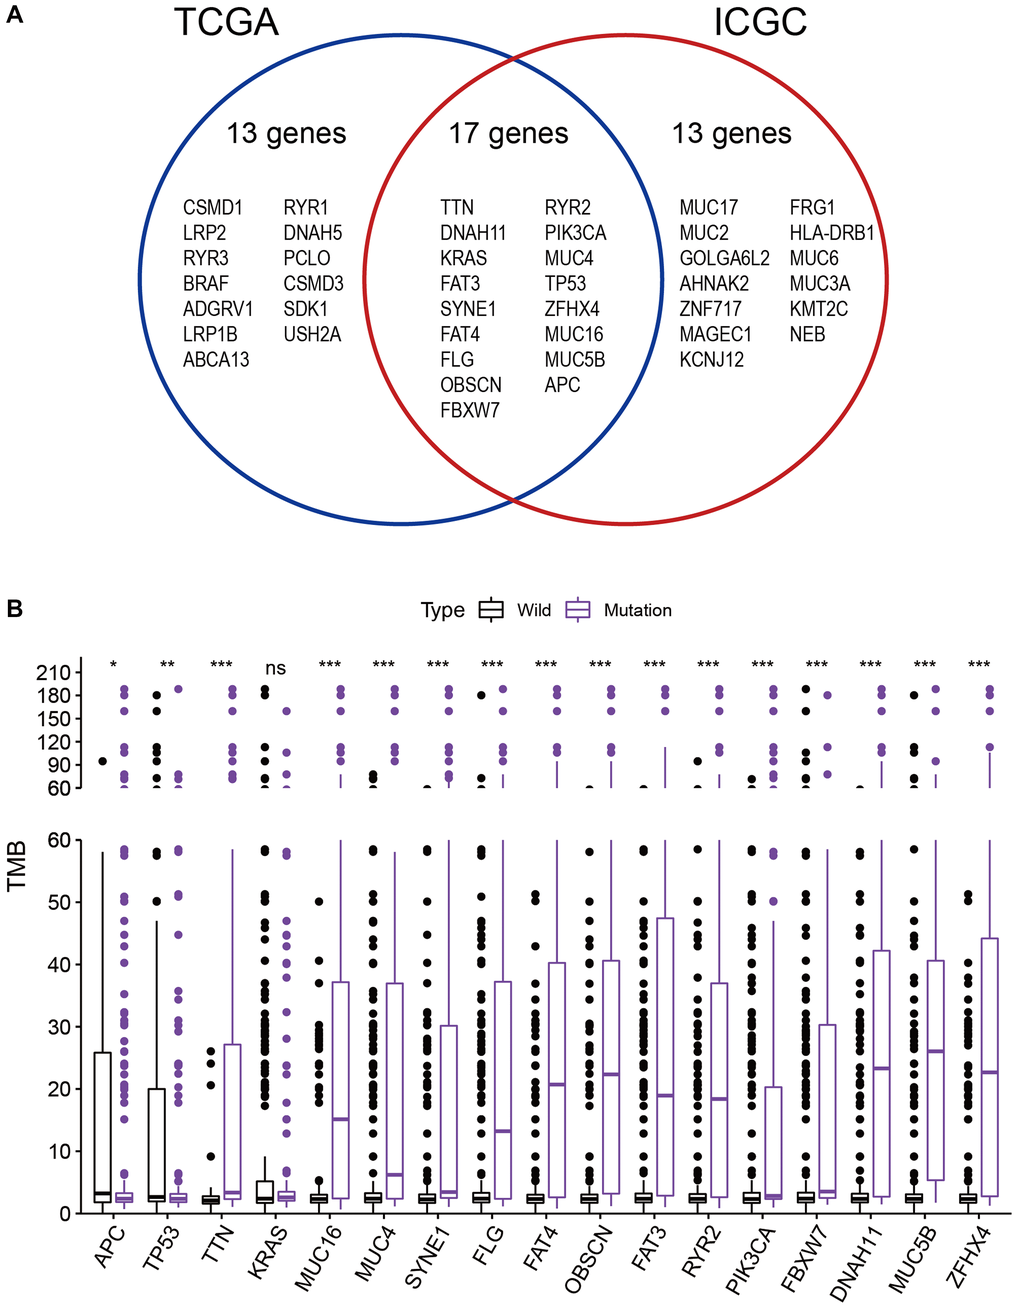 Gene mutations are associated with TMB. (A) Venn diagram shows 17 frequently mutated genes covered by both the TCGA and ICGC cohorts. (B) Sixteen genes with high mutation frequency are associated with a higher TMB. *p **p ***p 